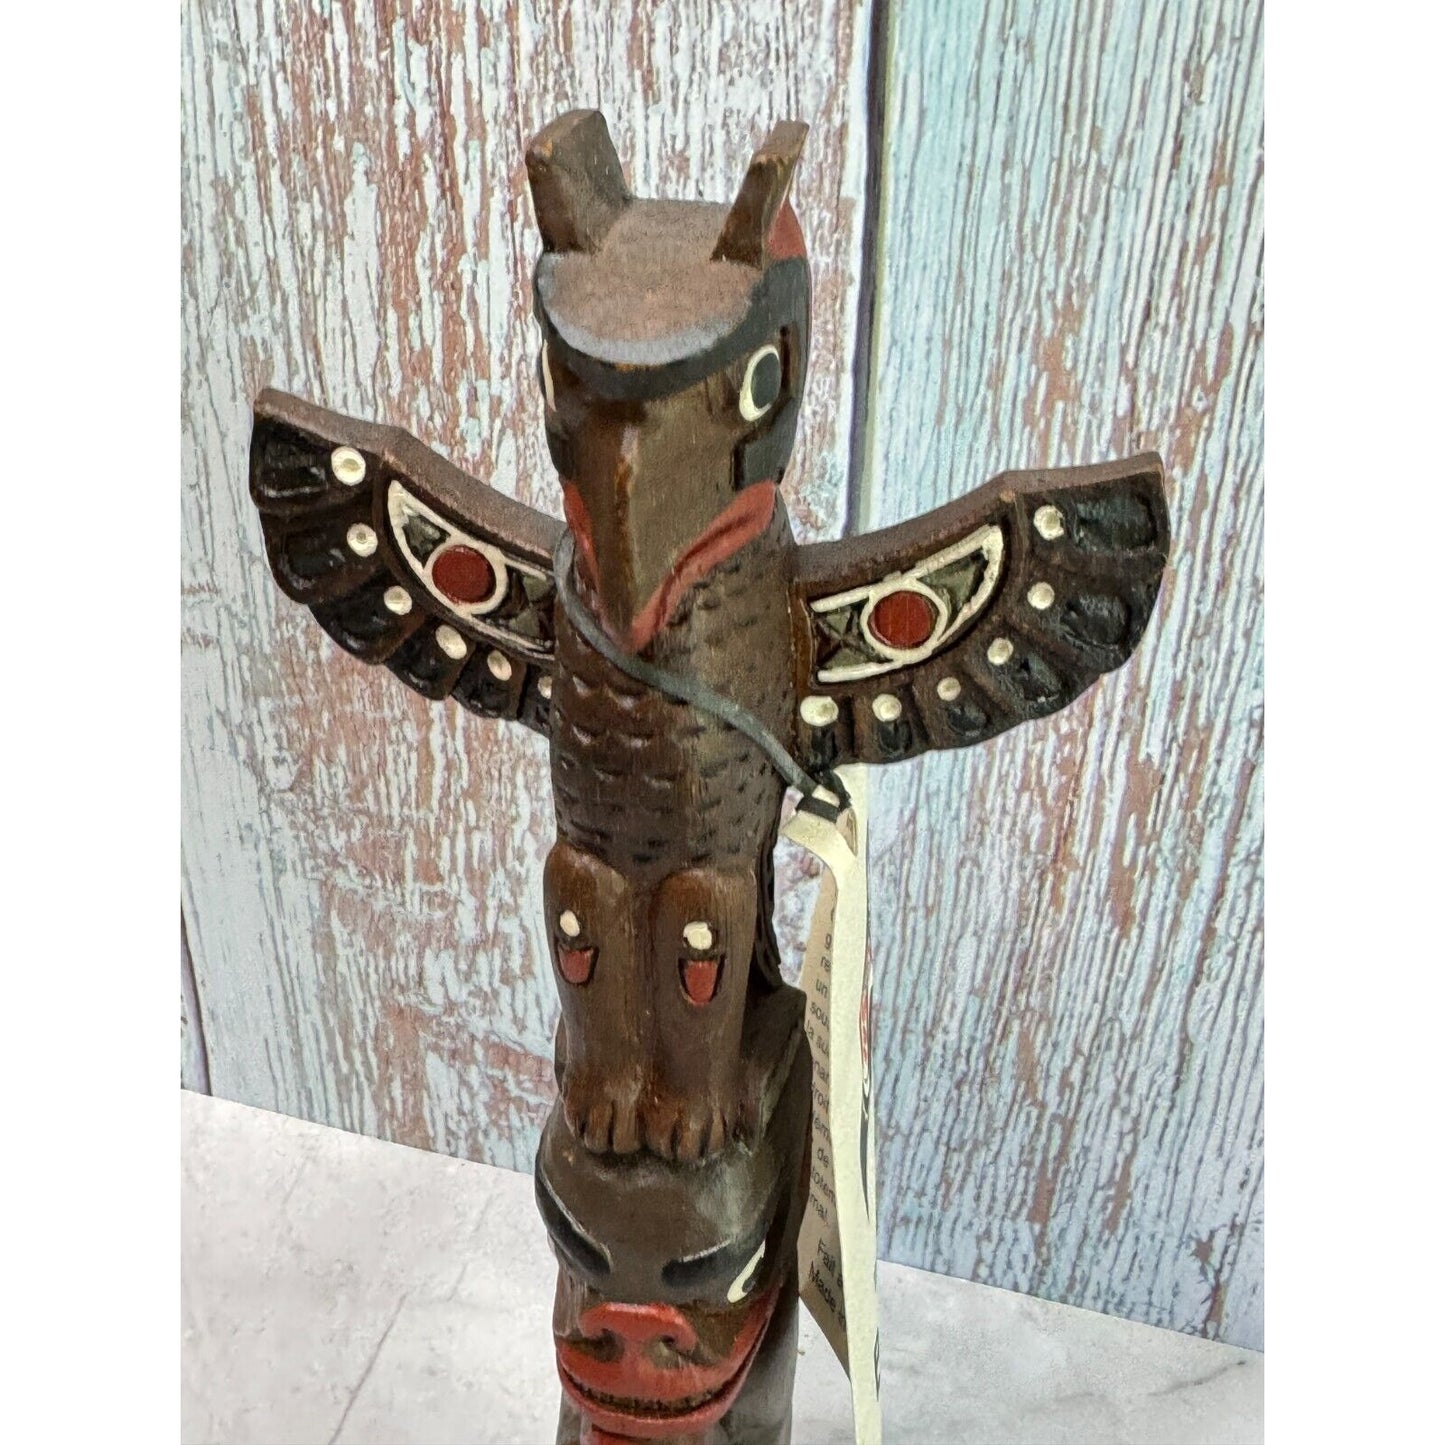 Boma Aboriginal Art Totem Pole Hand Crafted for Disney by Canadian Artists w/Tag